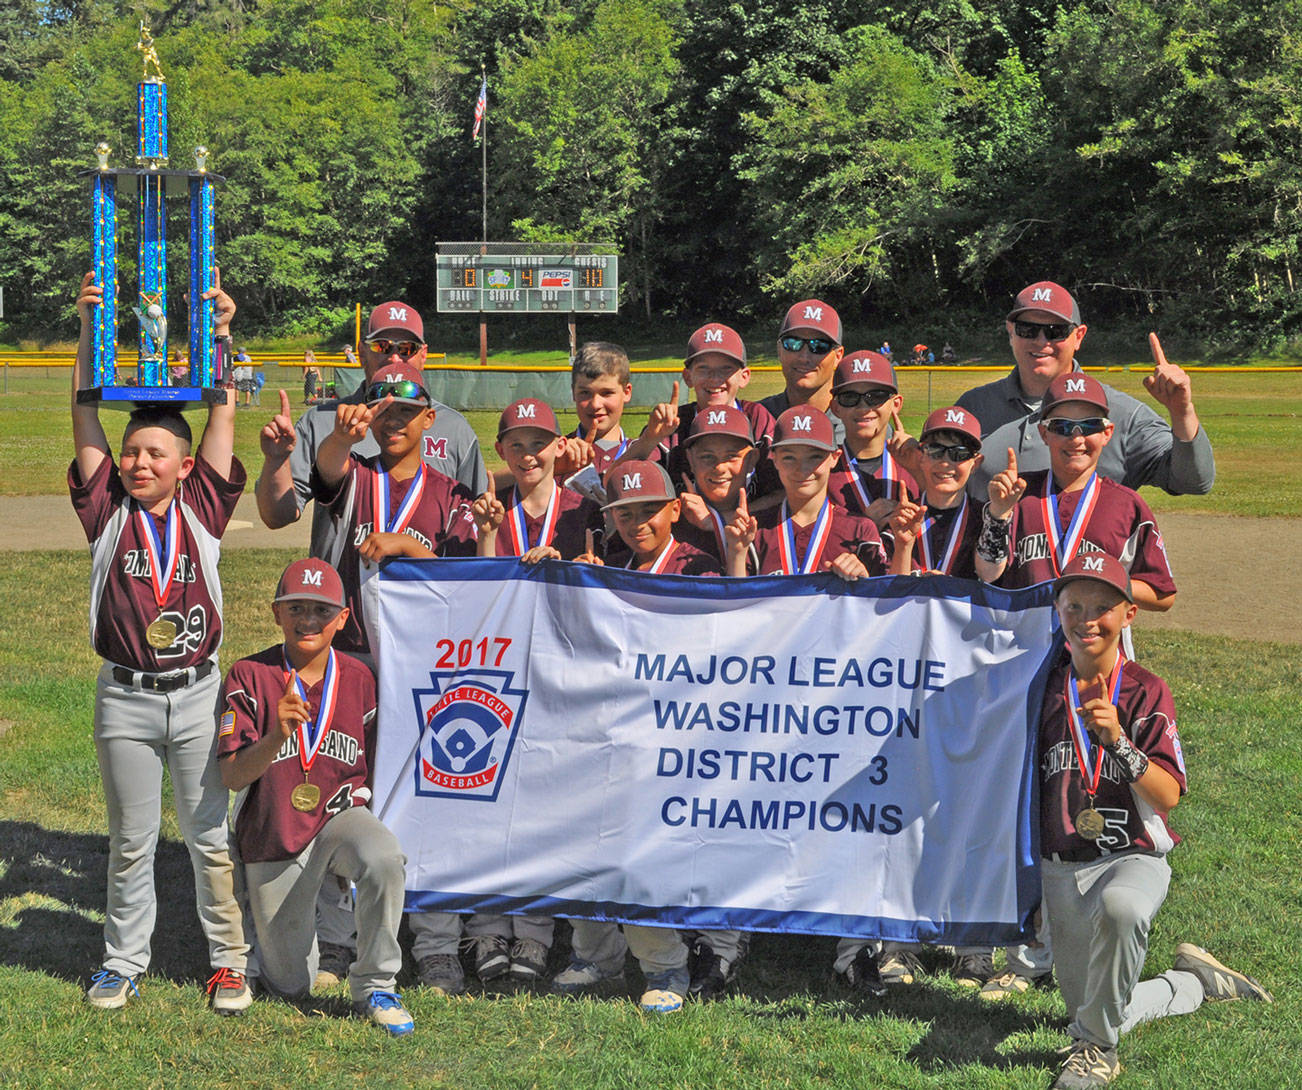 The District III 12U Majors title winners of Montesano. On Saturday, Aug 15, Montesano will travel to Federal Way National Little League to begin the Washington State 12U Majors Tournament.